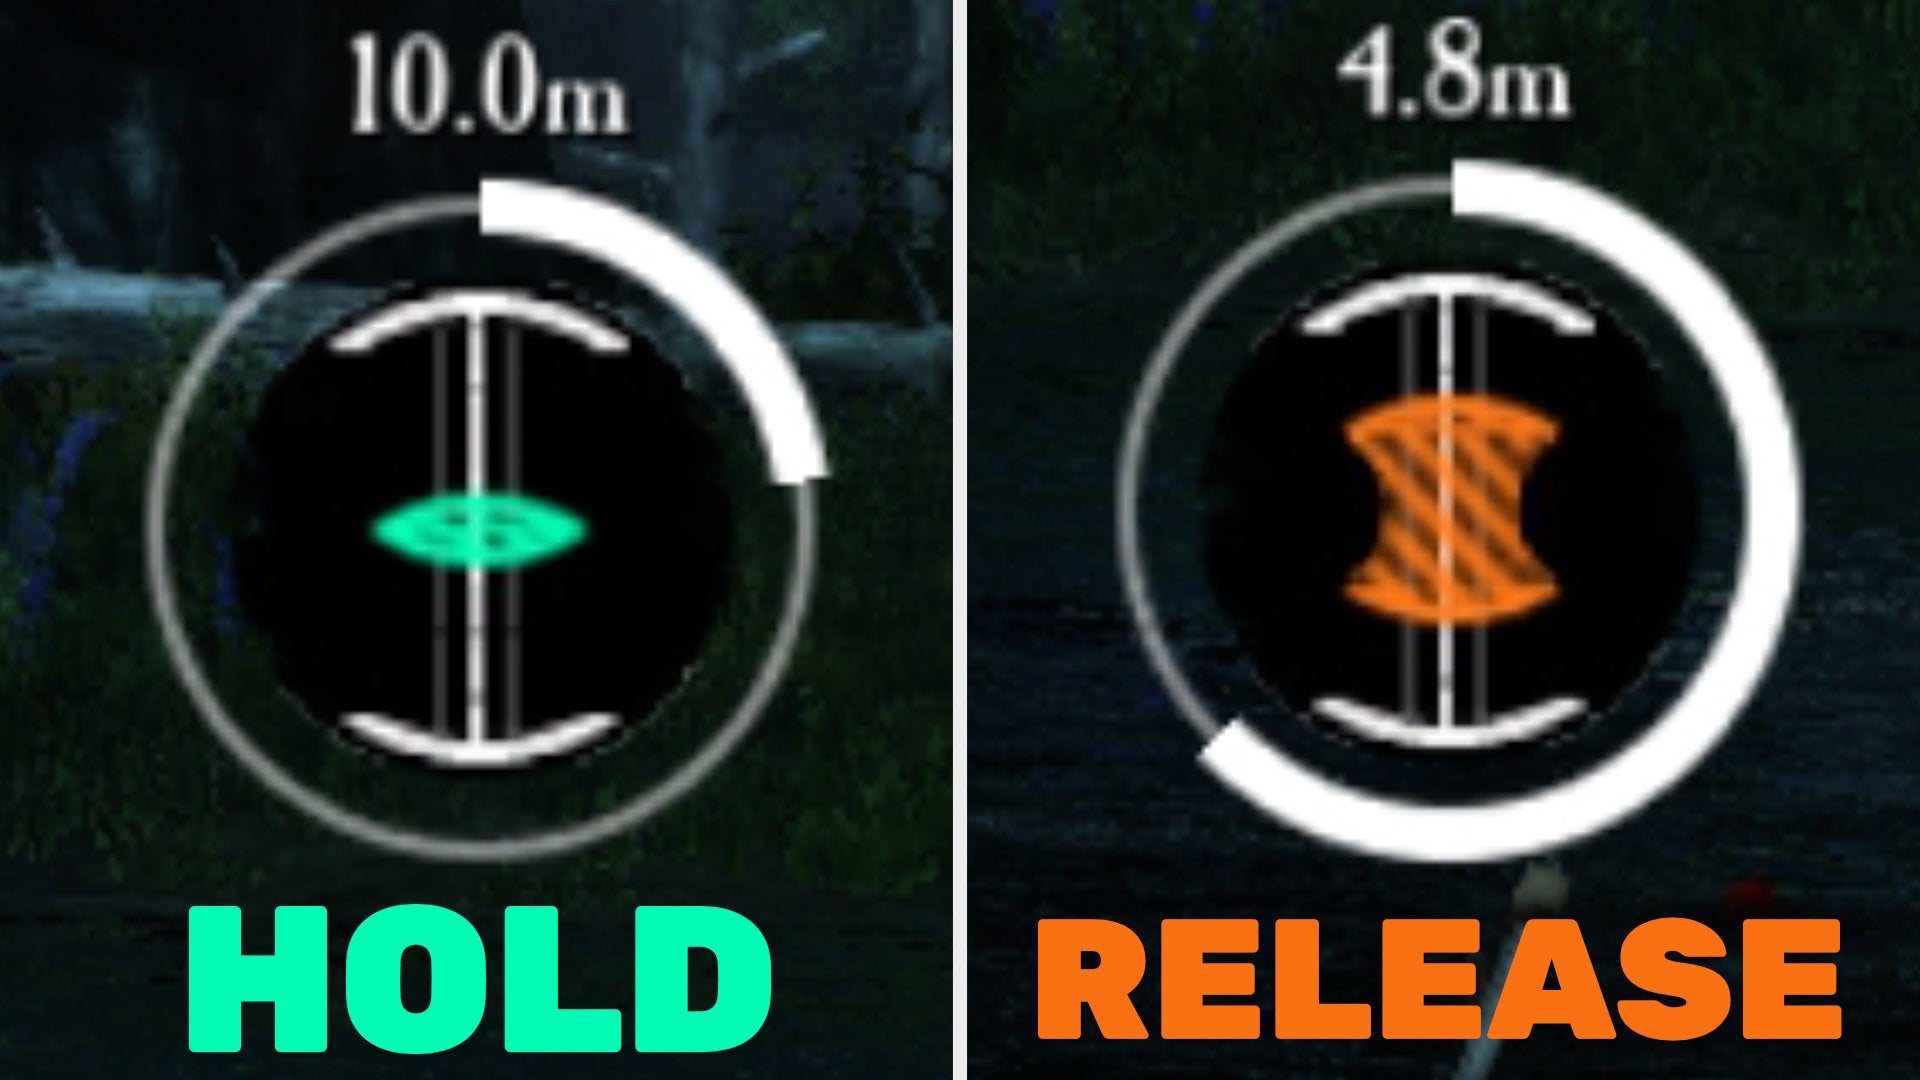 A side-by-side comparison of the fishing icon in New World: green on the left, orange on the right.